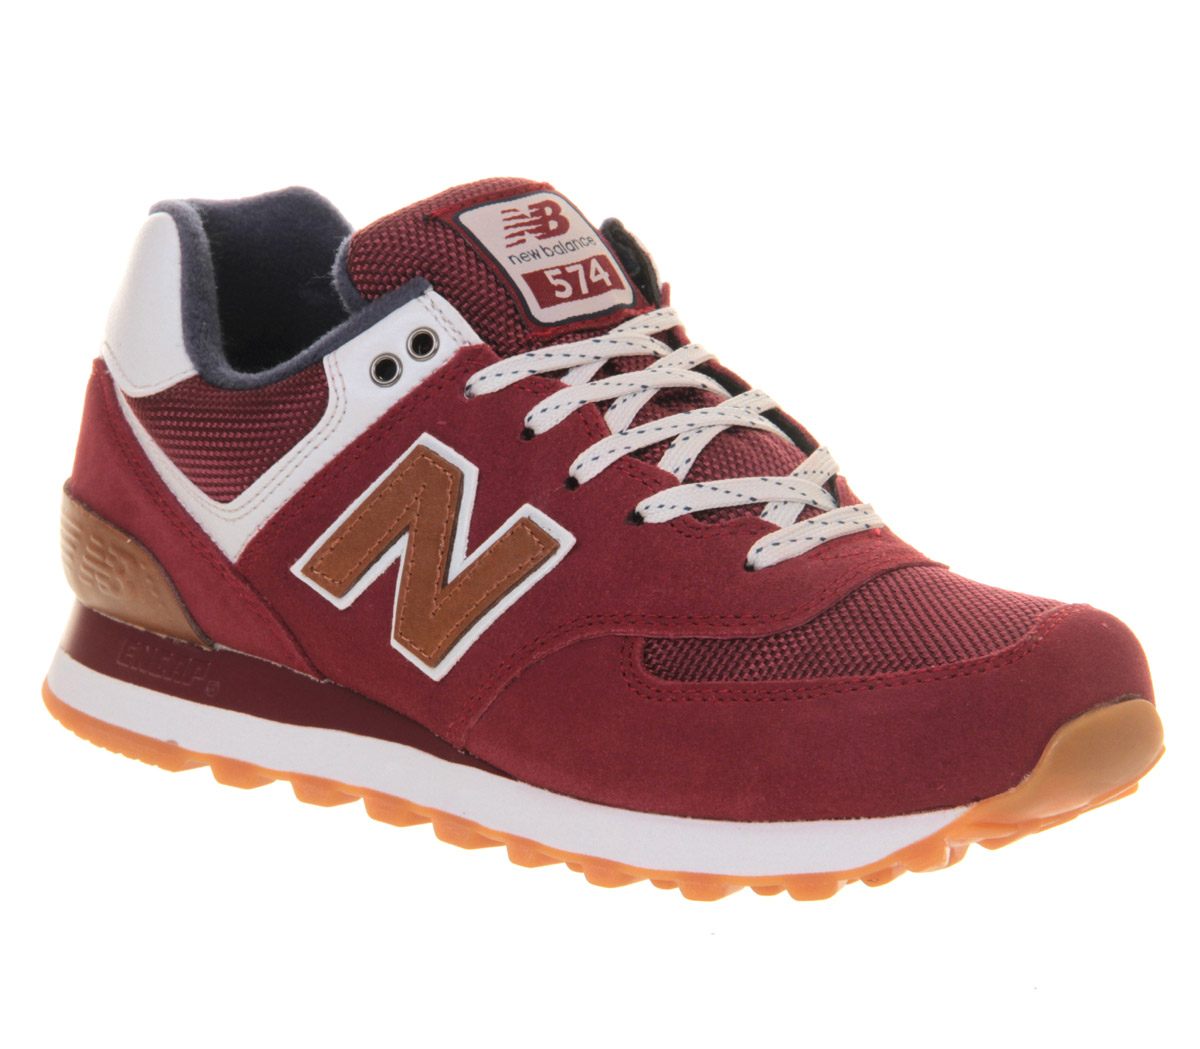 Nb M574 On Sale, UP TO 66% OFF